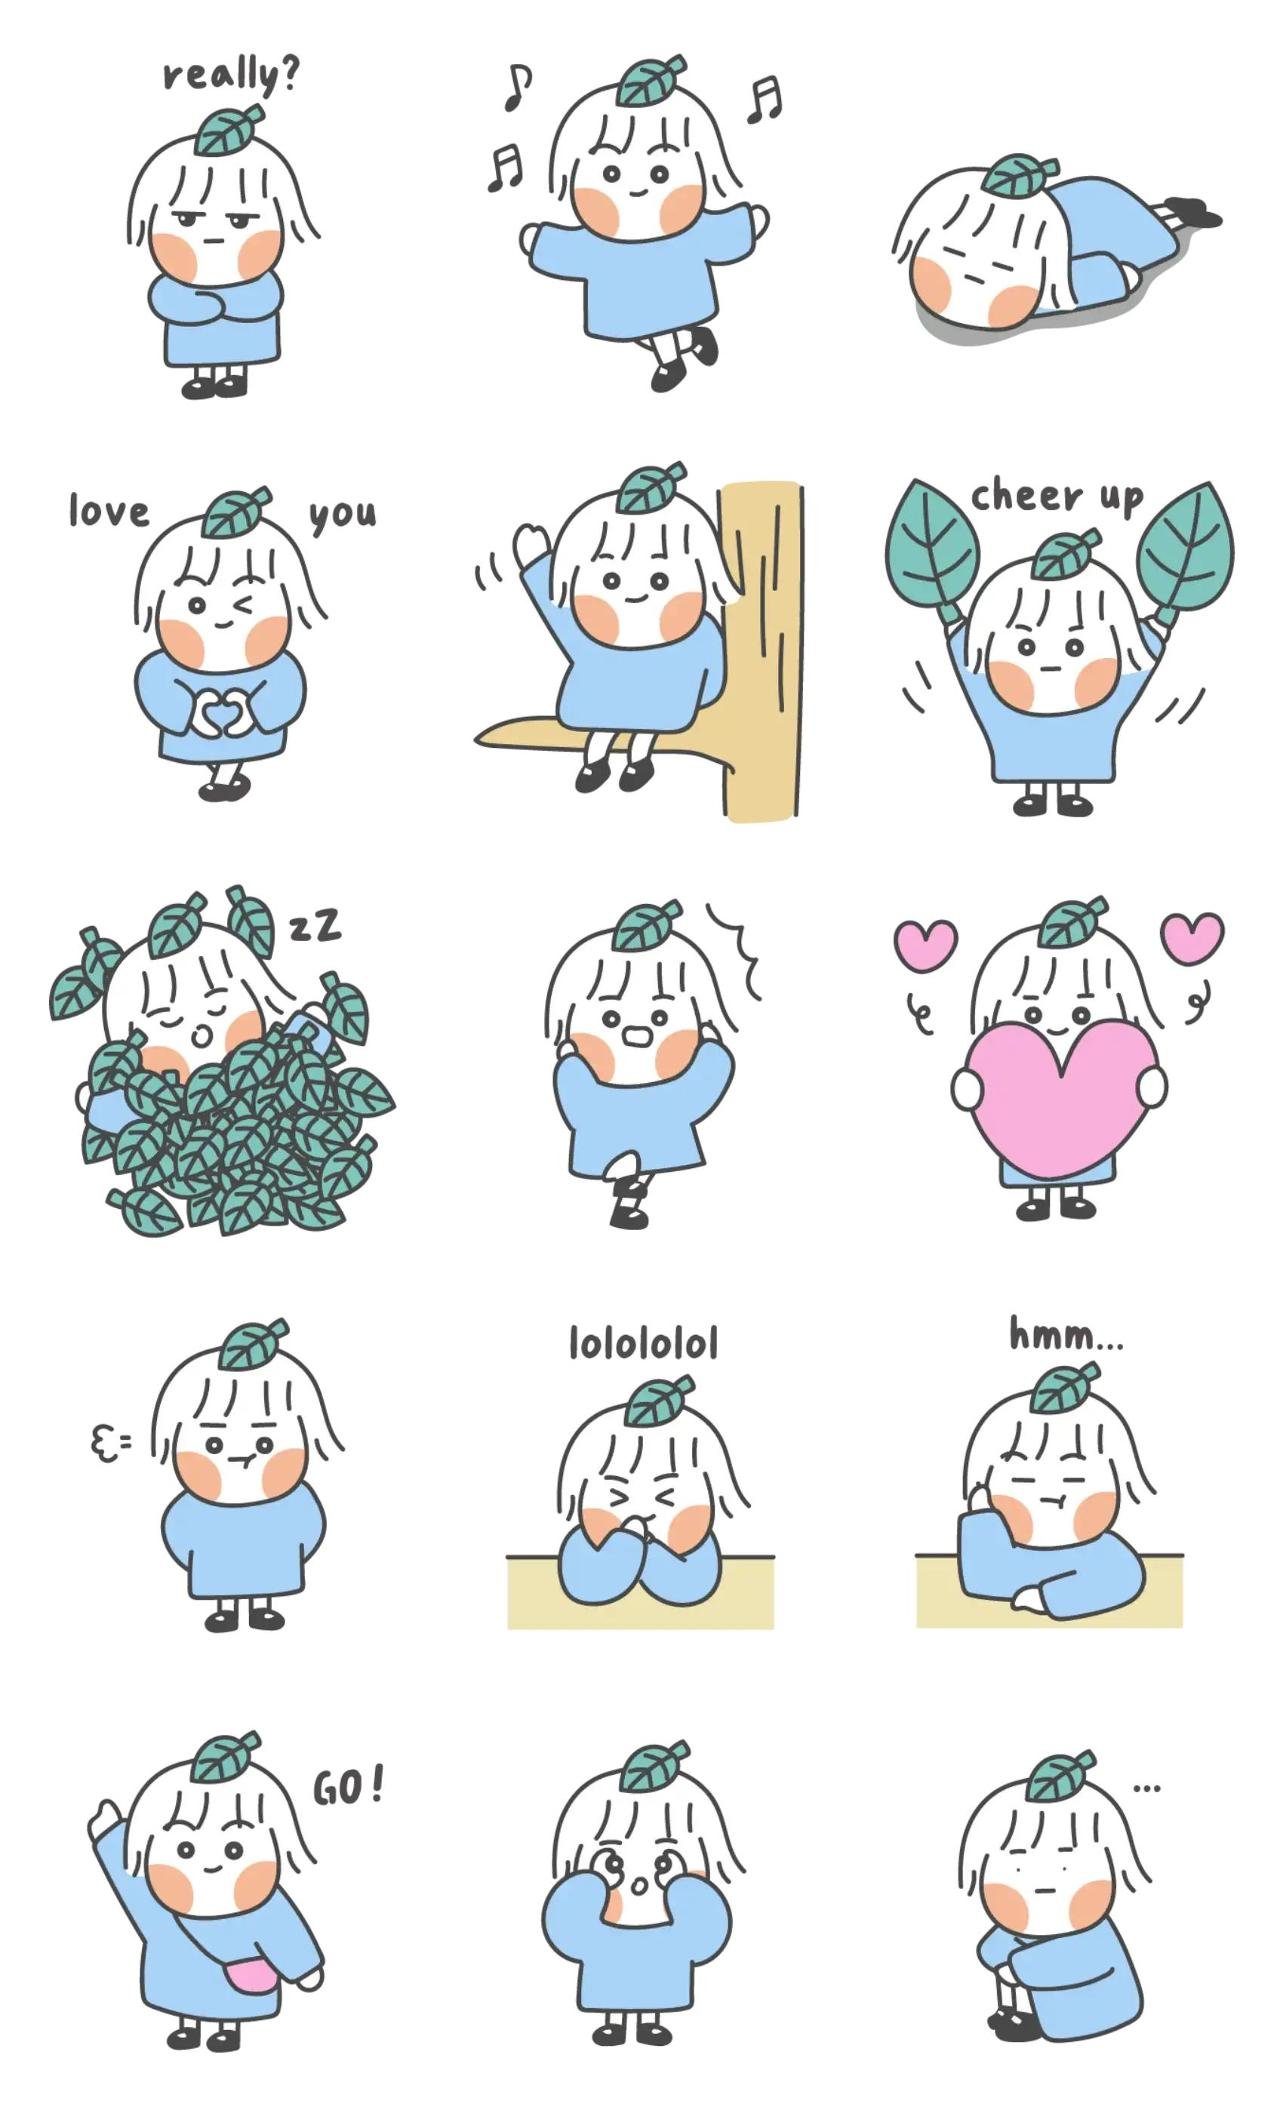 Leaf girl Animation/Cartoon,People sticker pack for Whatsapp, Telegram, Signal, and others chatting and message apps